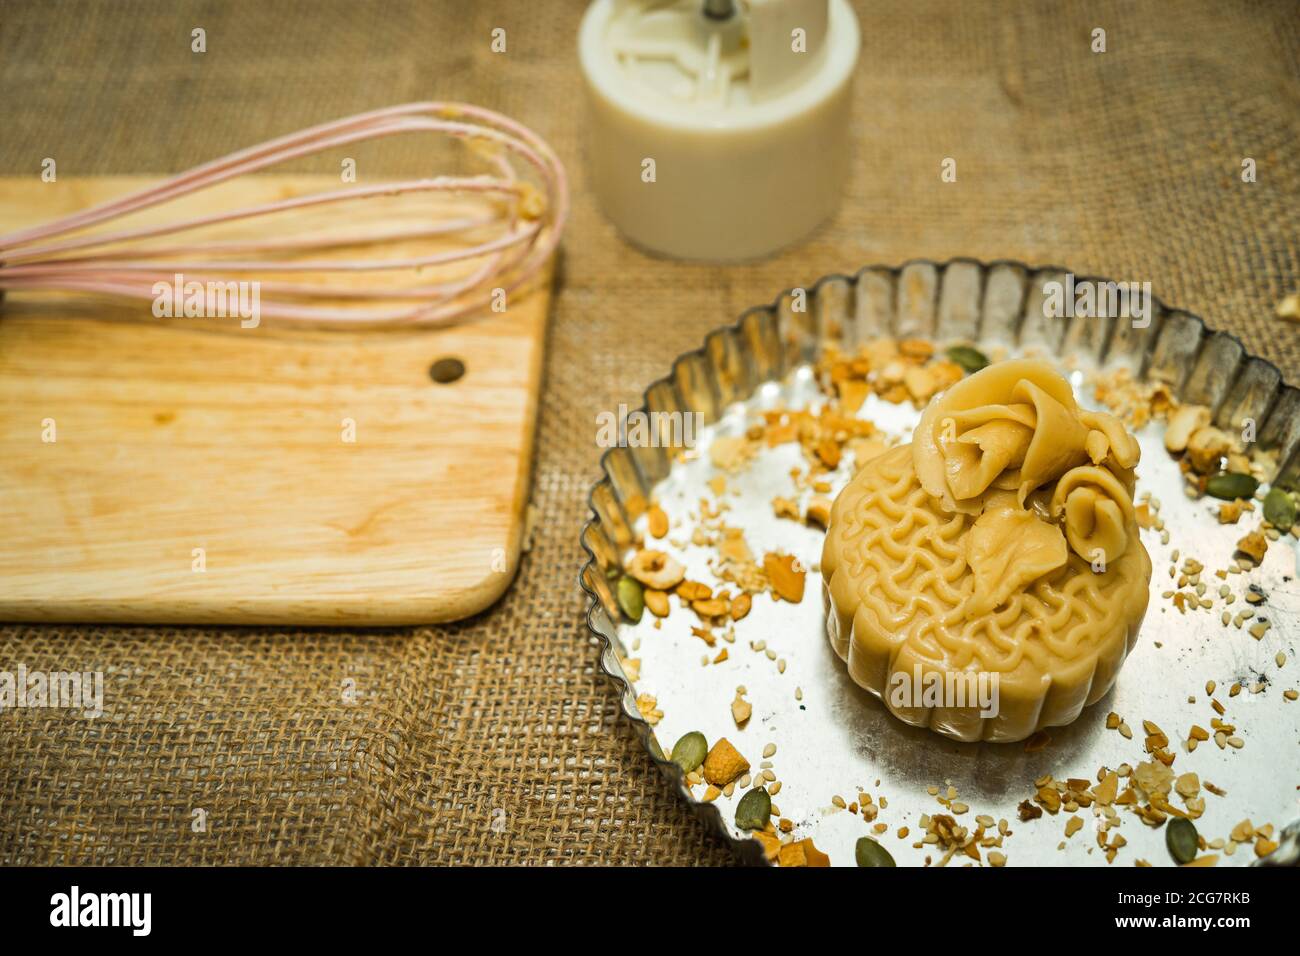 the wooden mold for moon cake, homemade cantonese moon cake pastry on baking tray before baking for traditional festival. Travel, holiday, food concep Stock Photo